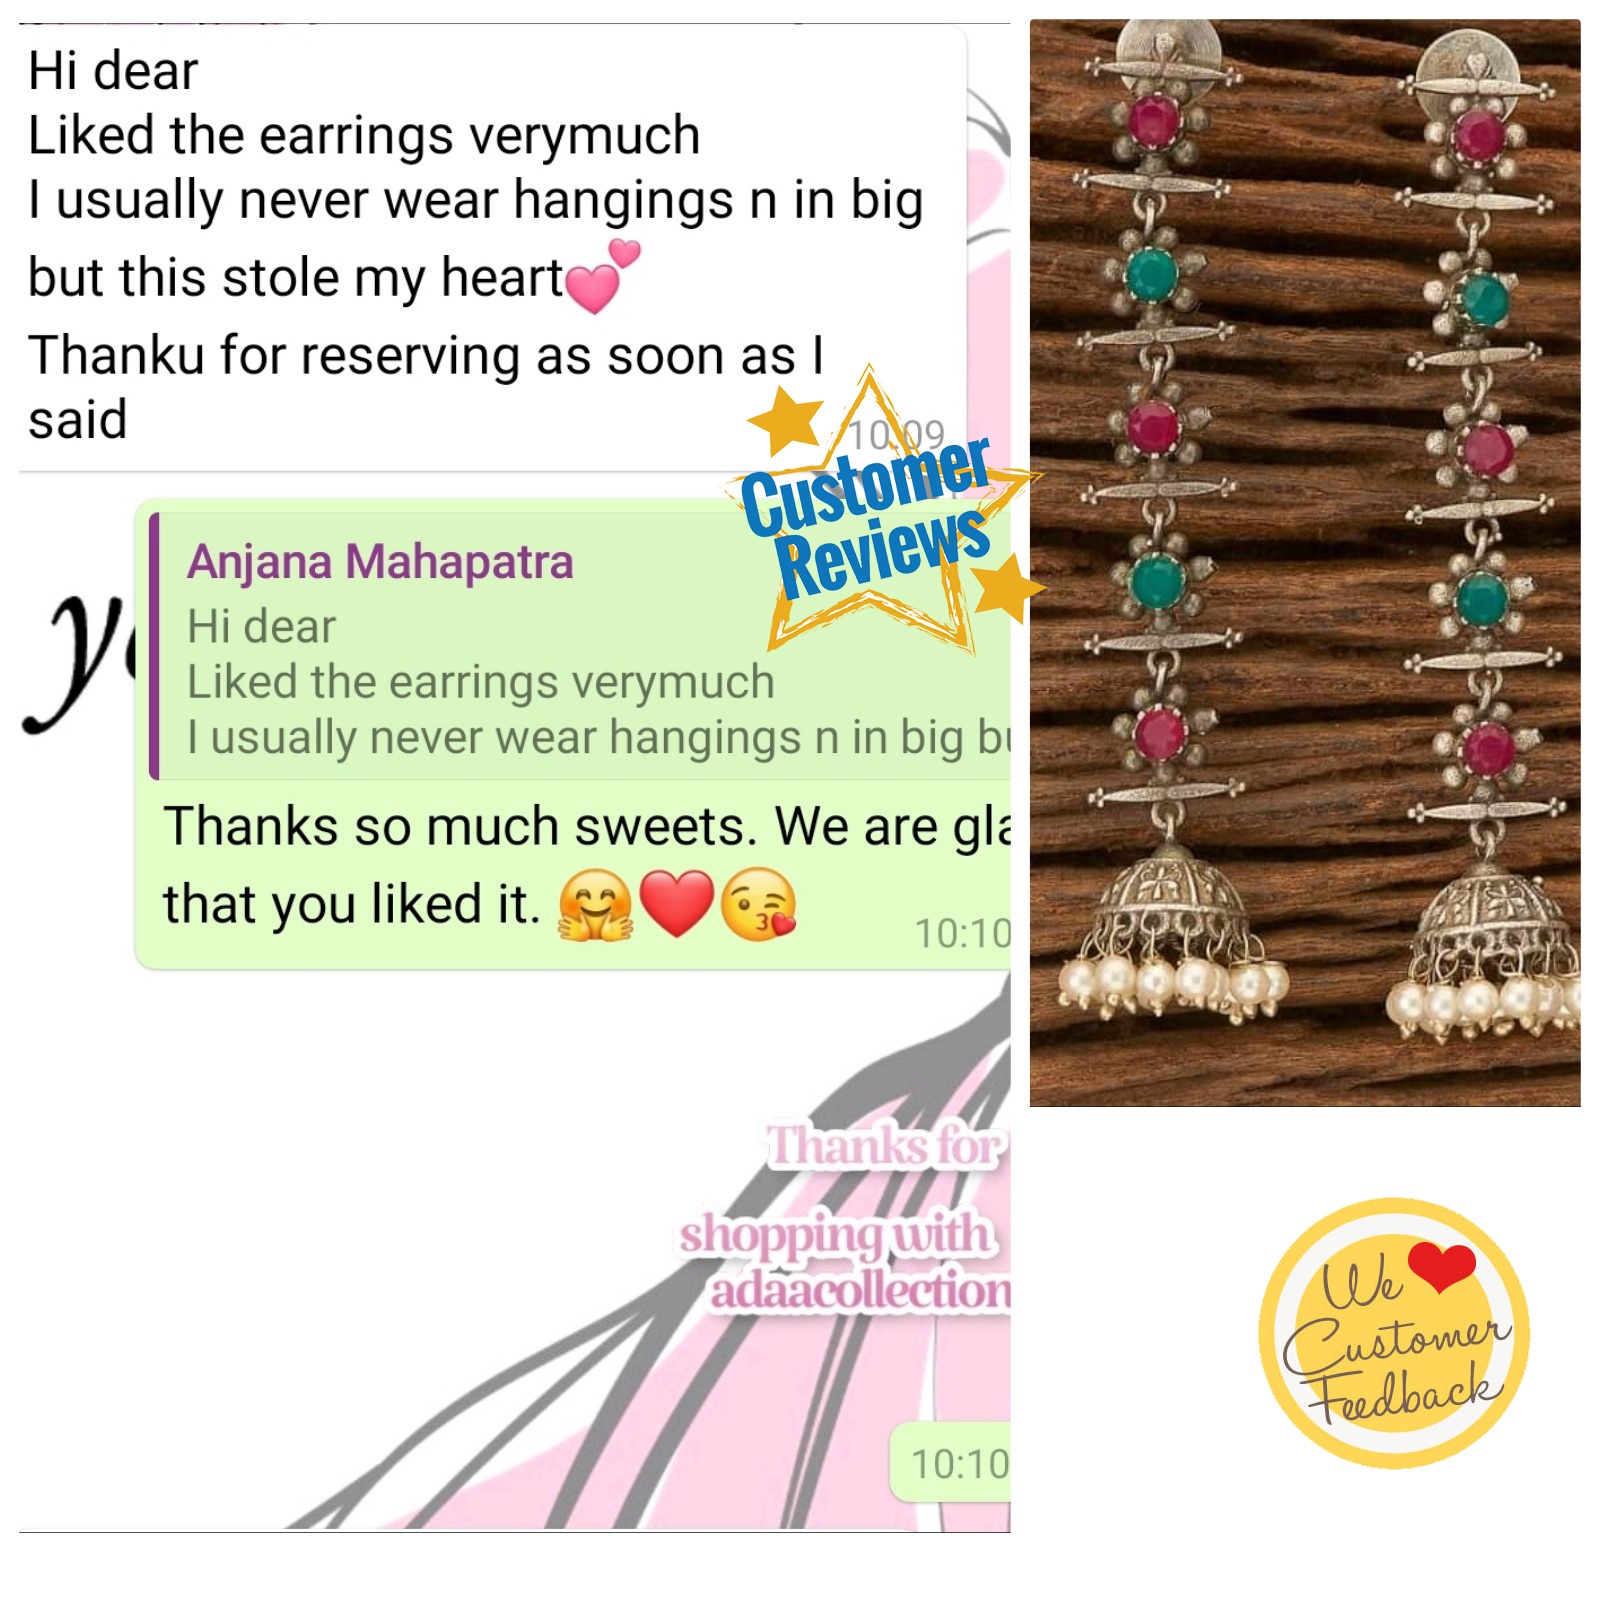 VILLAGE COUNCIL -Six Cool Facts About Handmade Earrings